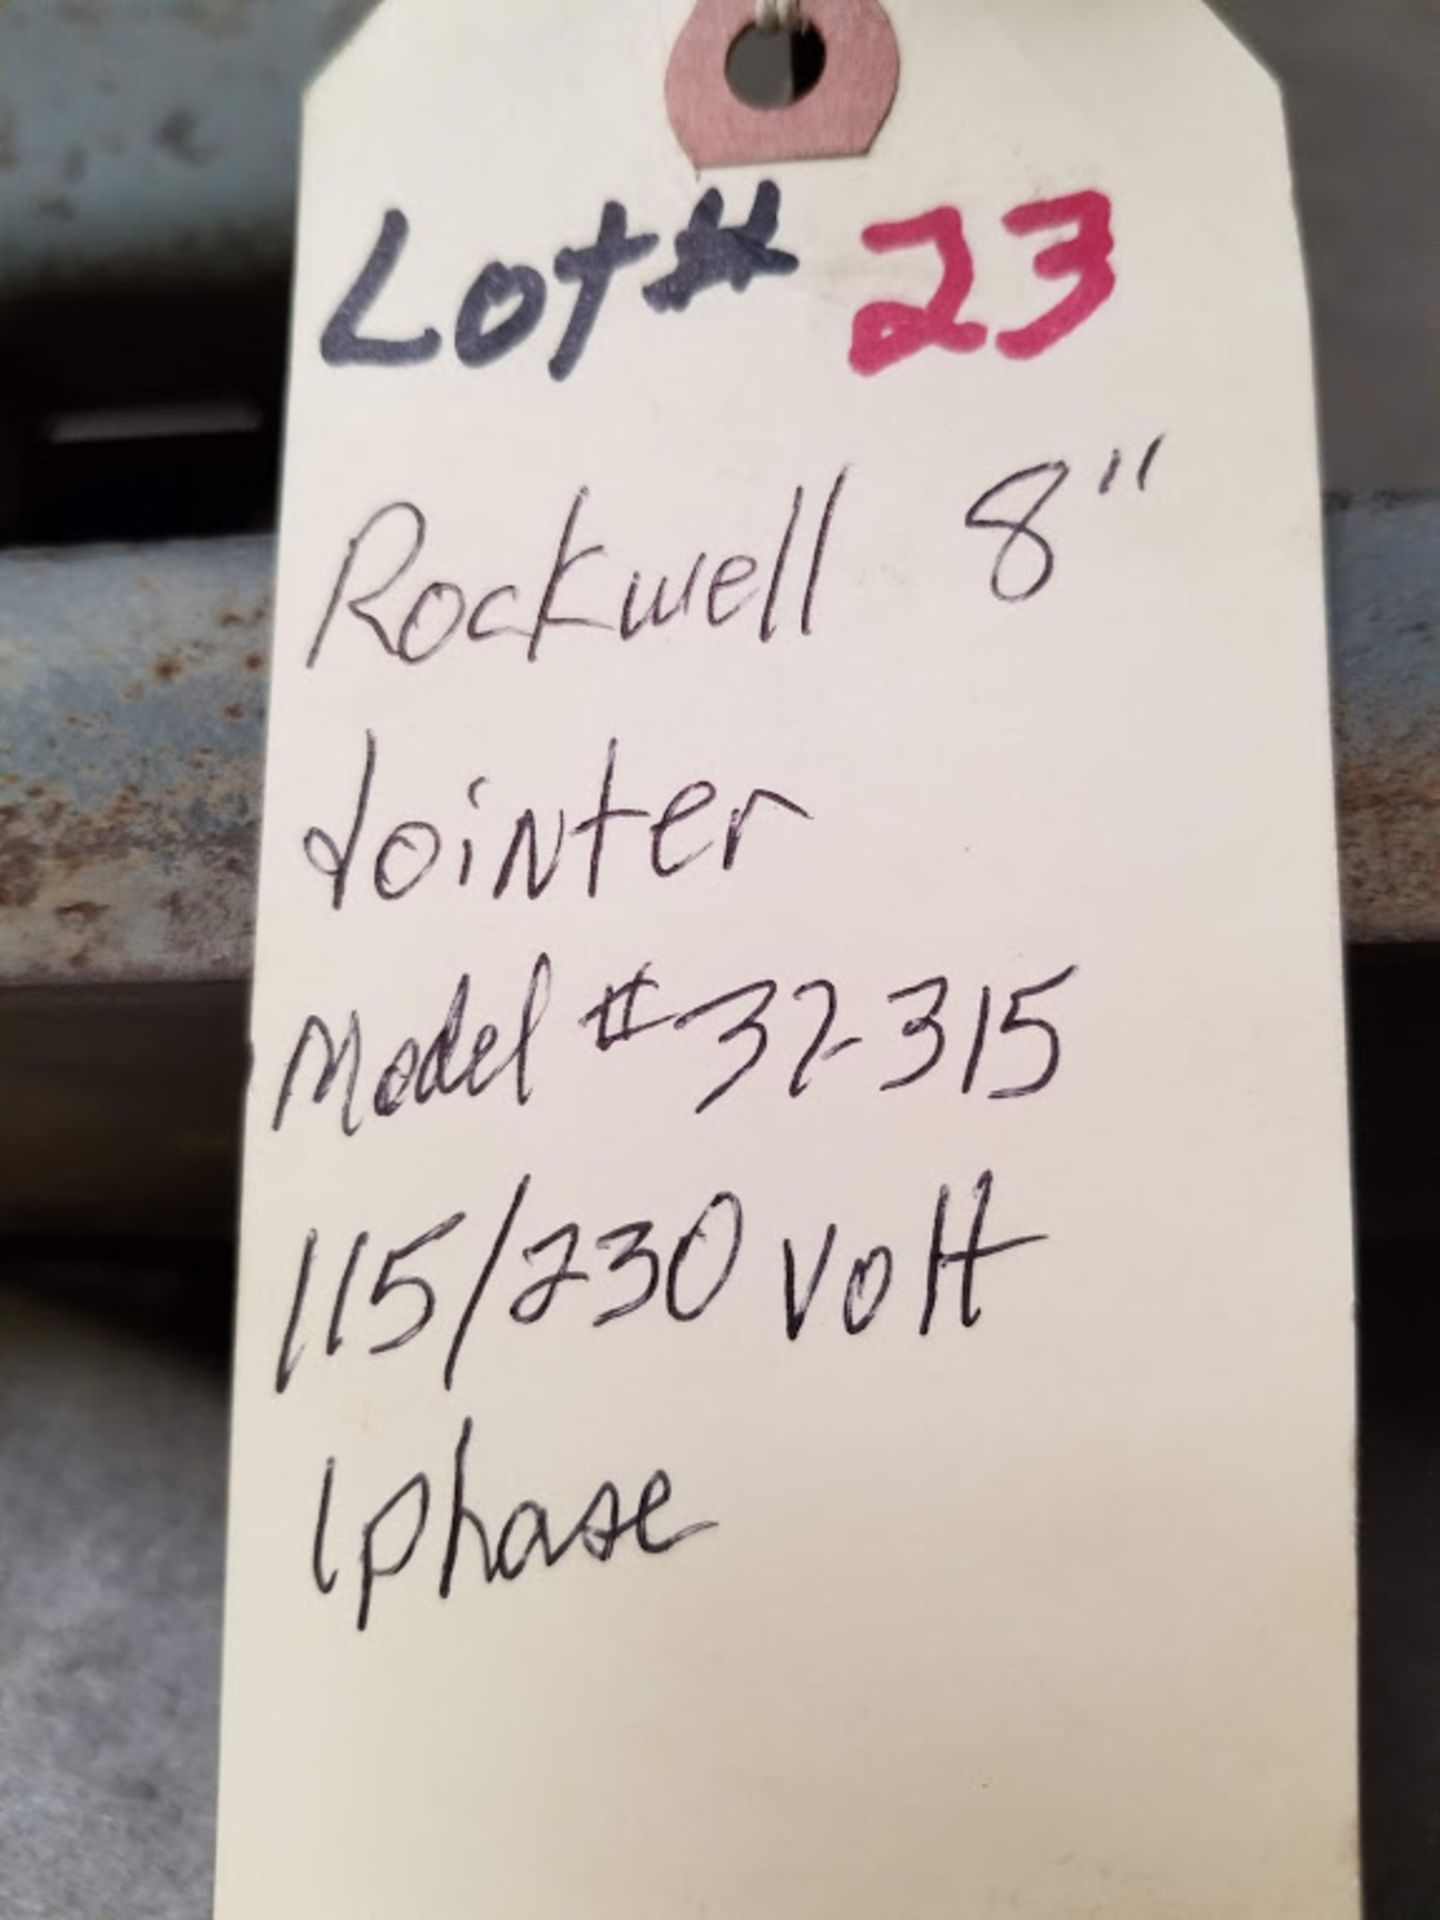 Rockwell 8" Jointer, Model #37-315, 1.5 HP 115/230 volt 1 phase - Image 5 of 5